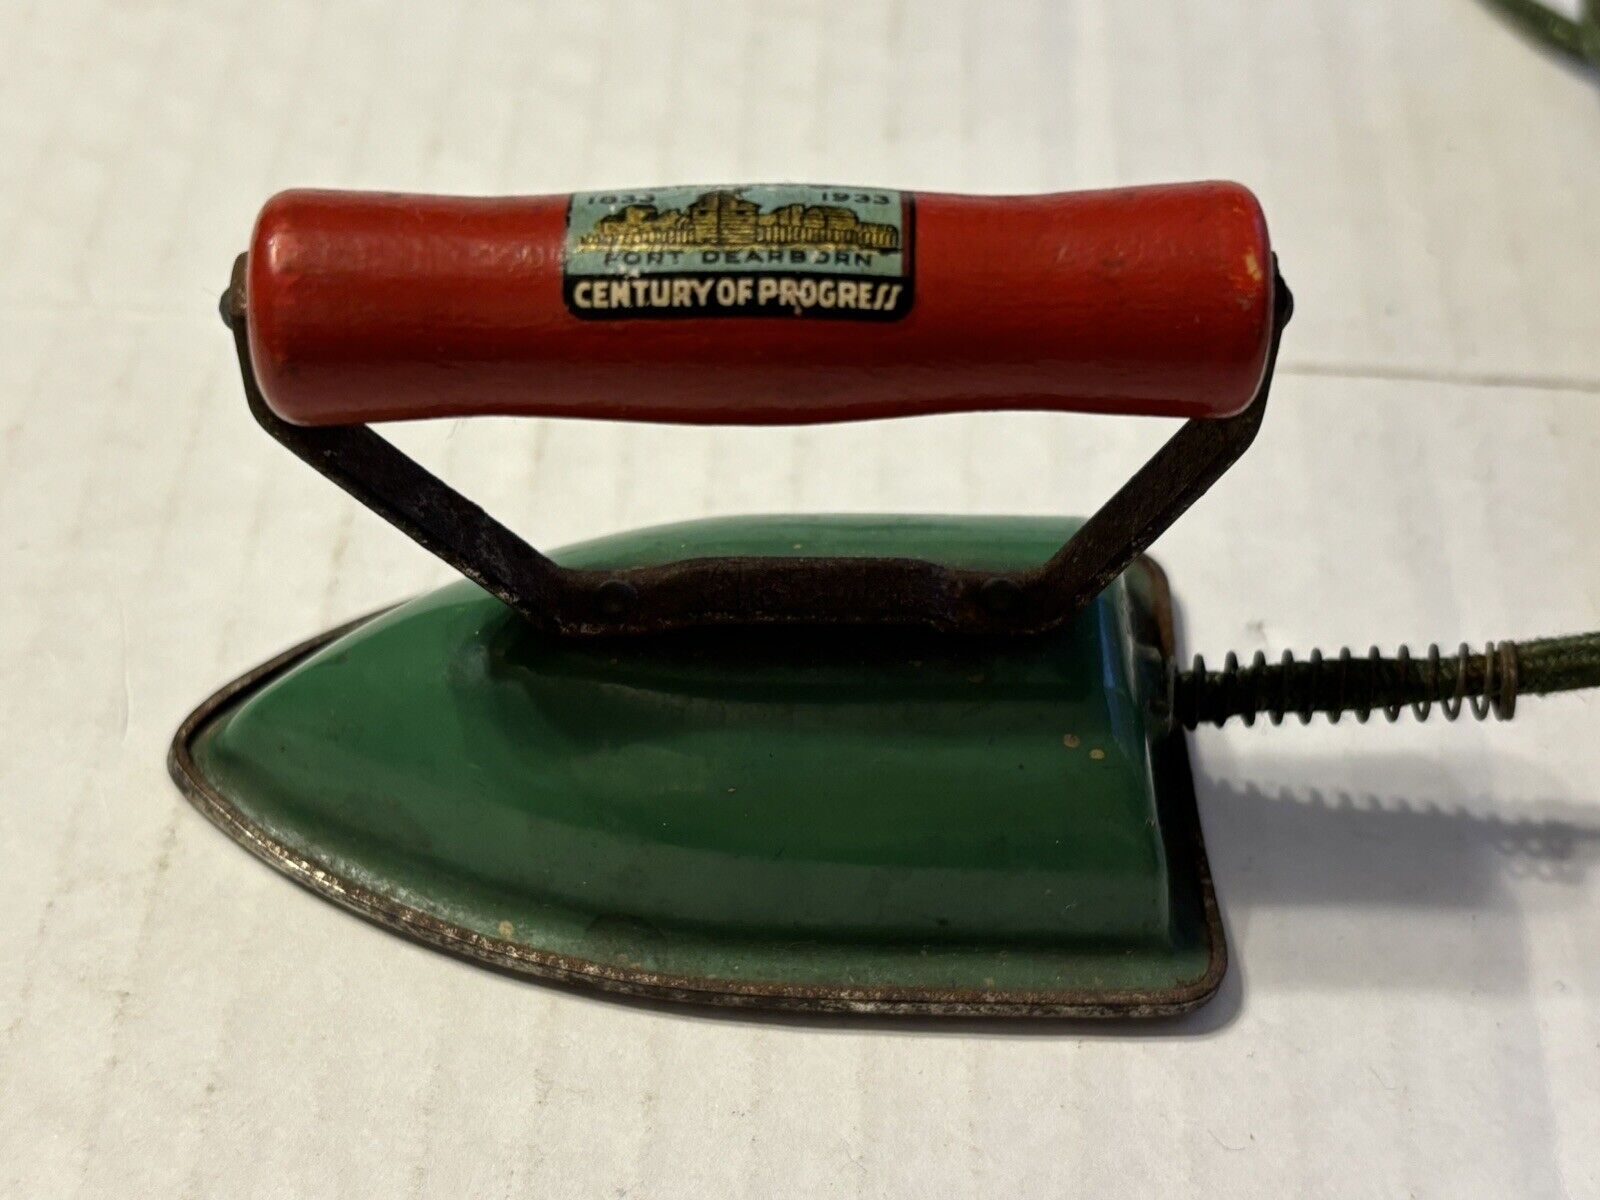 Antique Mini Iron Toy Advertising Piece 1933 Chicago Fort Dearborn Cent of Prog